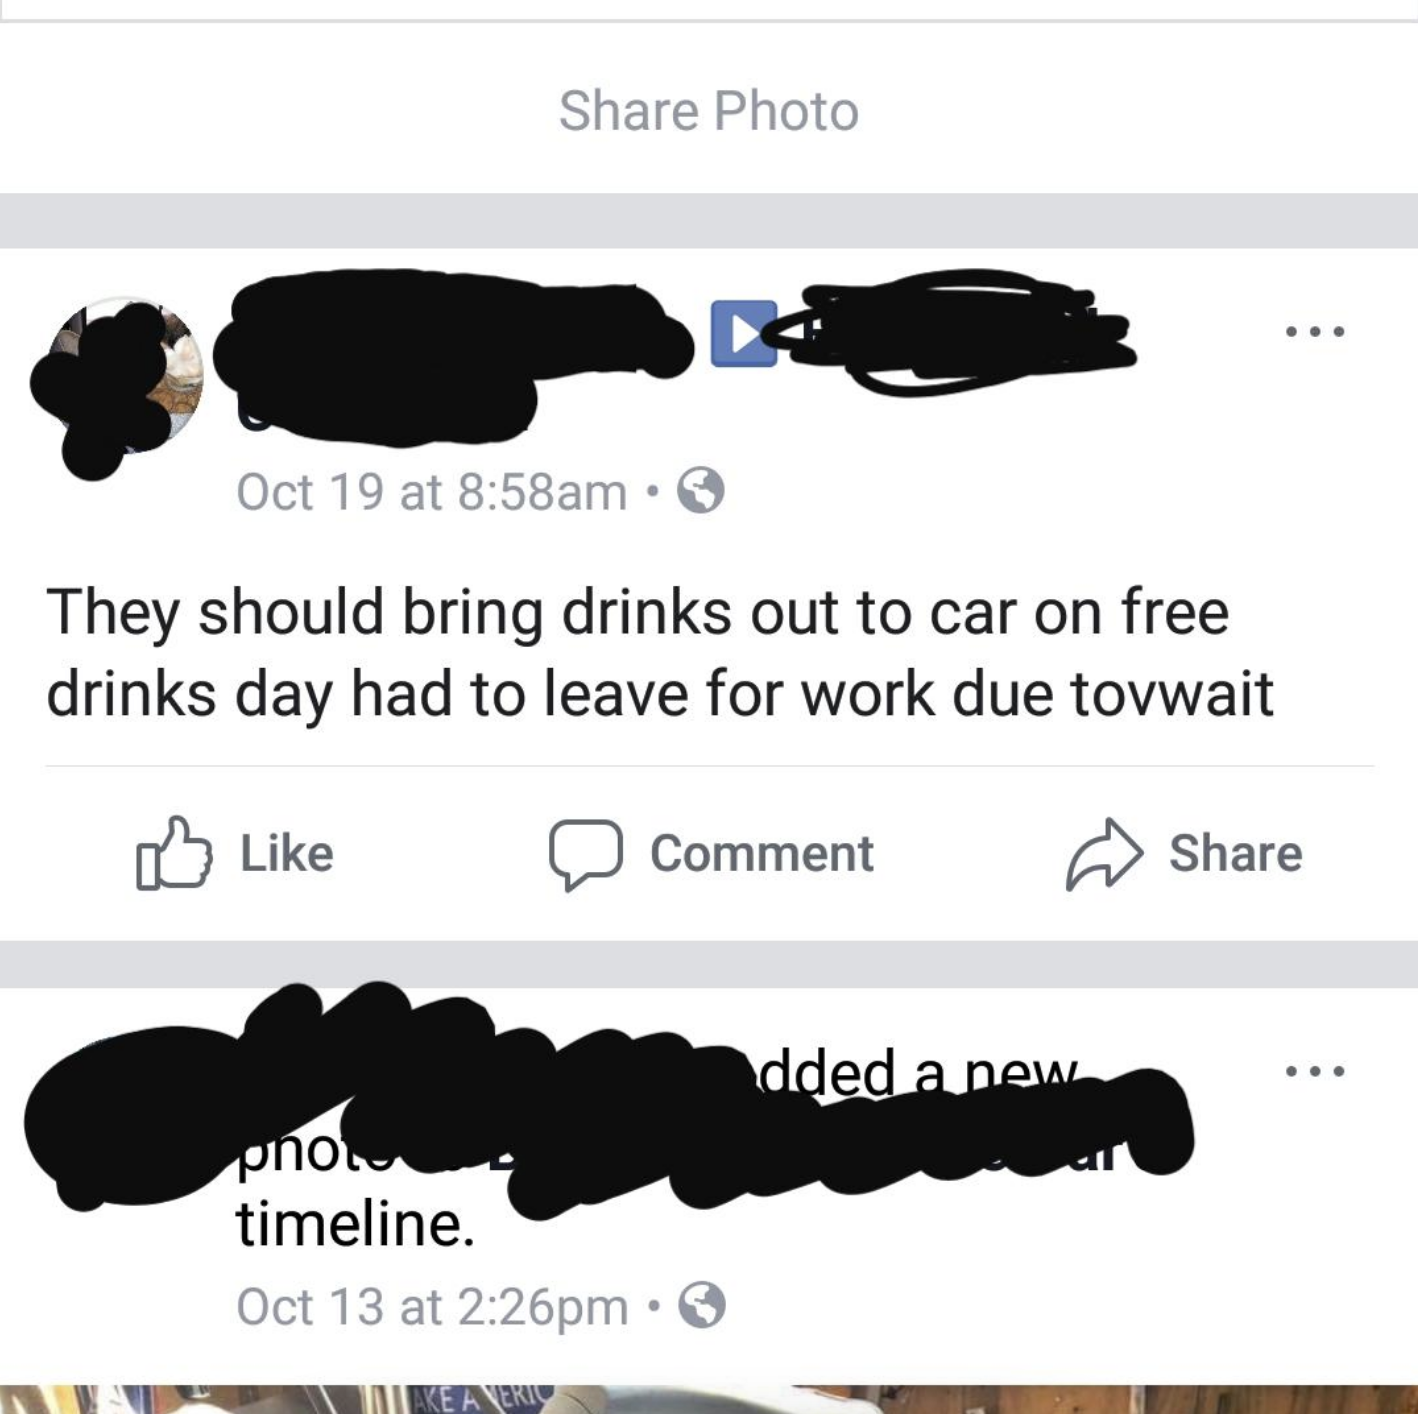 &quot;They should bring drinks out to car on free drinks day. Had to leave for work due to wait&quot;